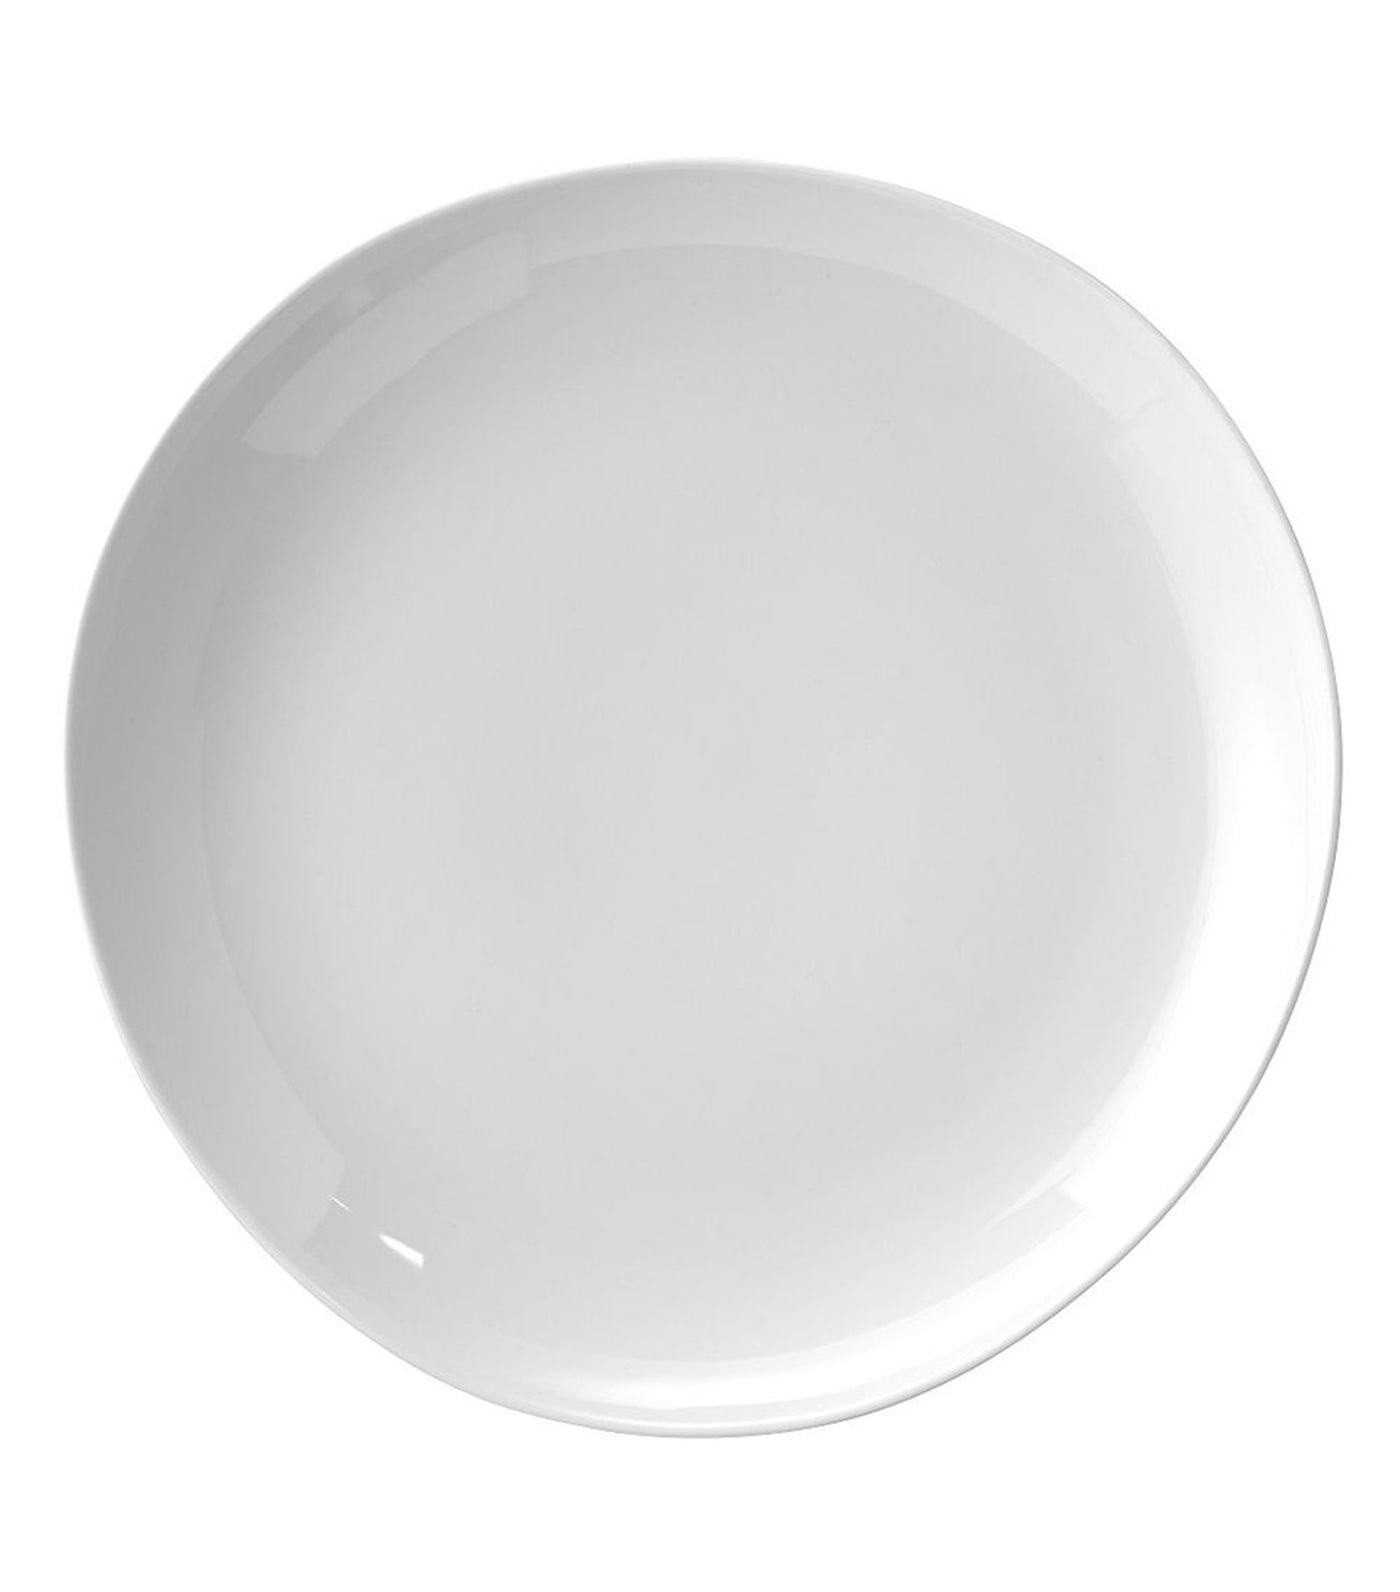 west elm Organic Shaped Dinnerware Collection 